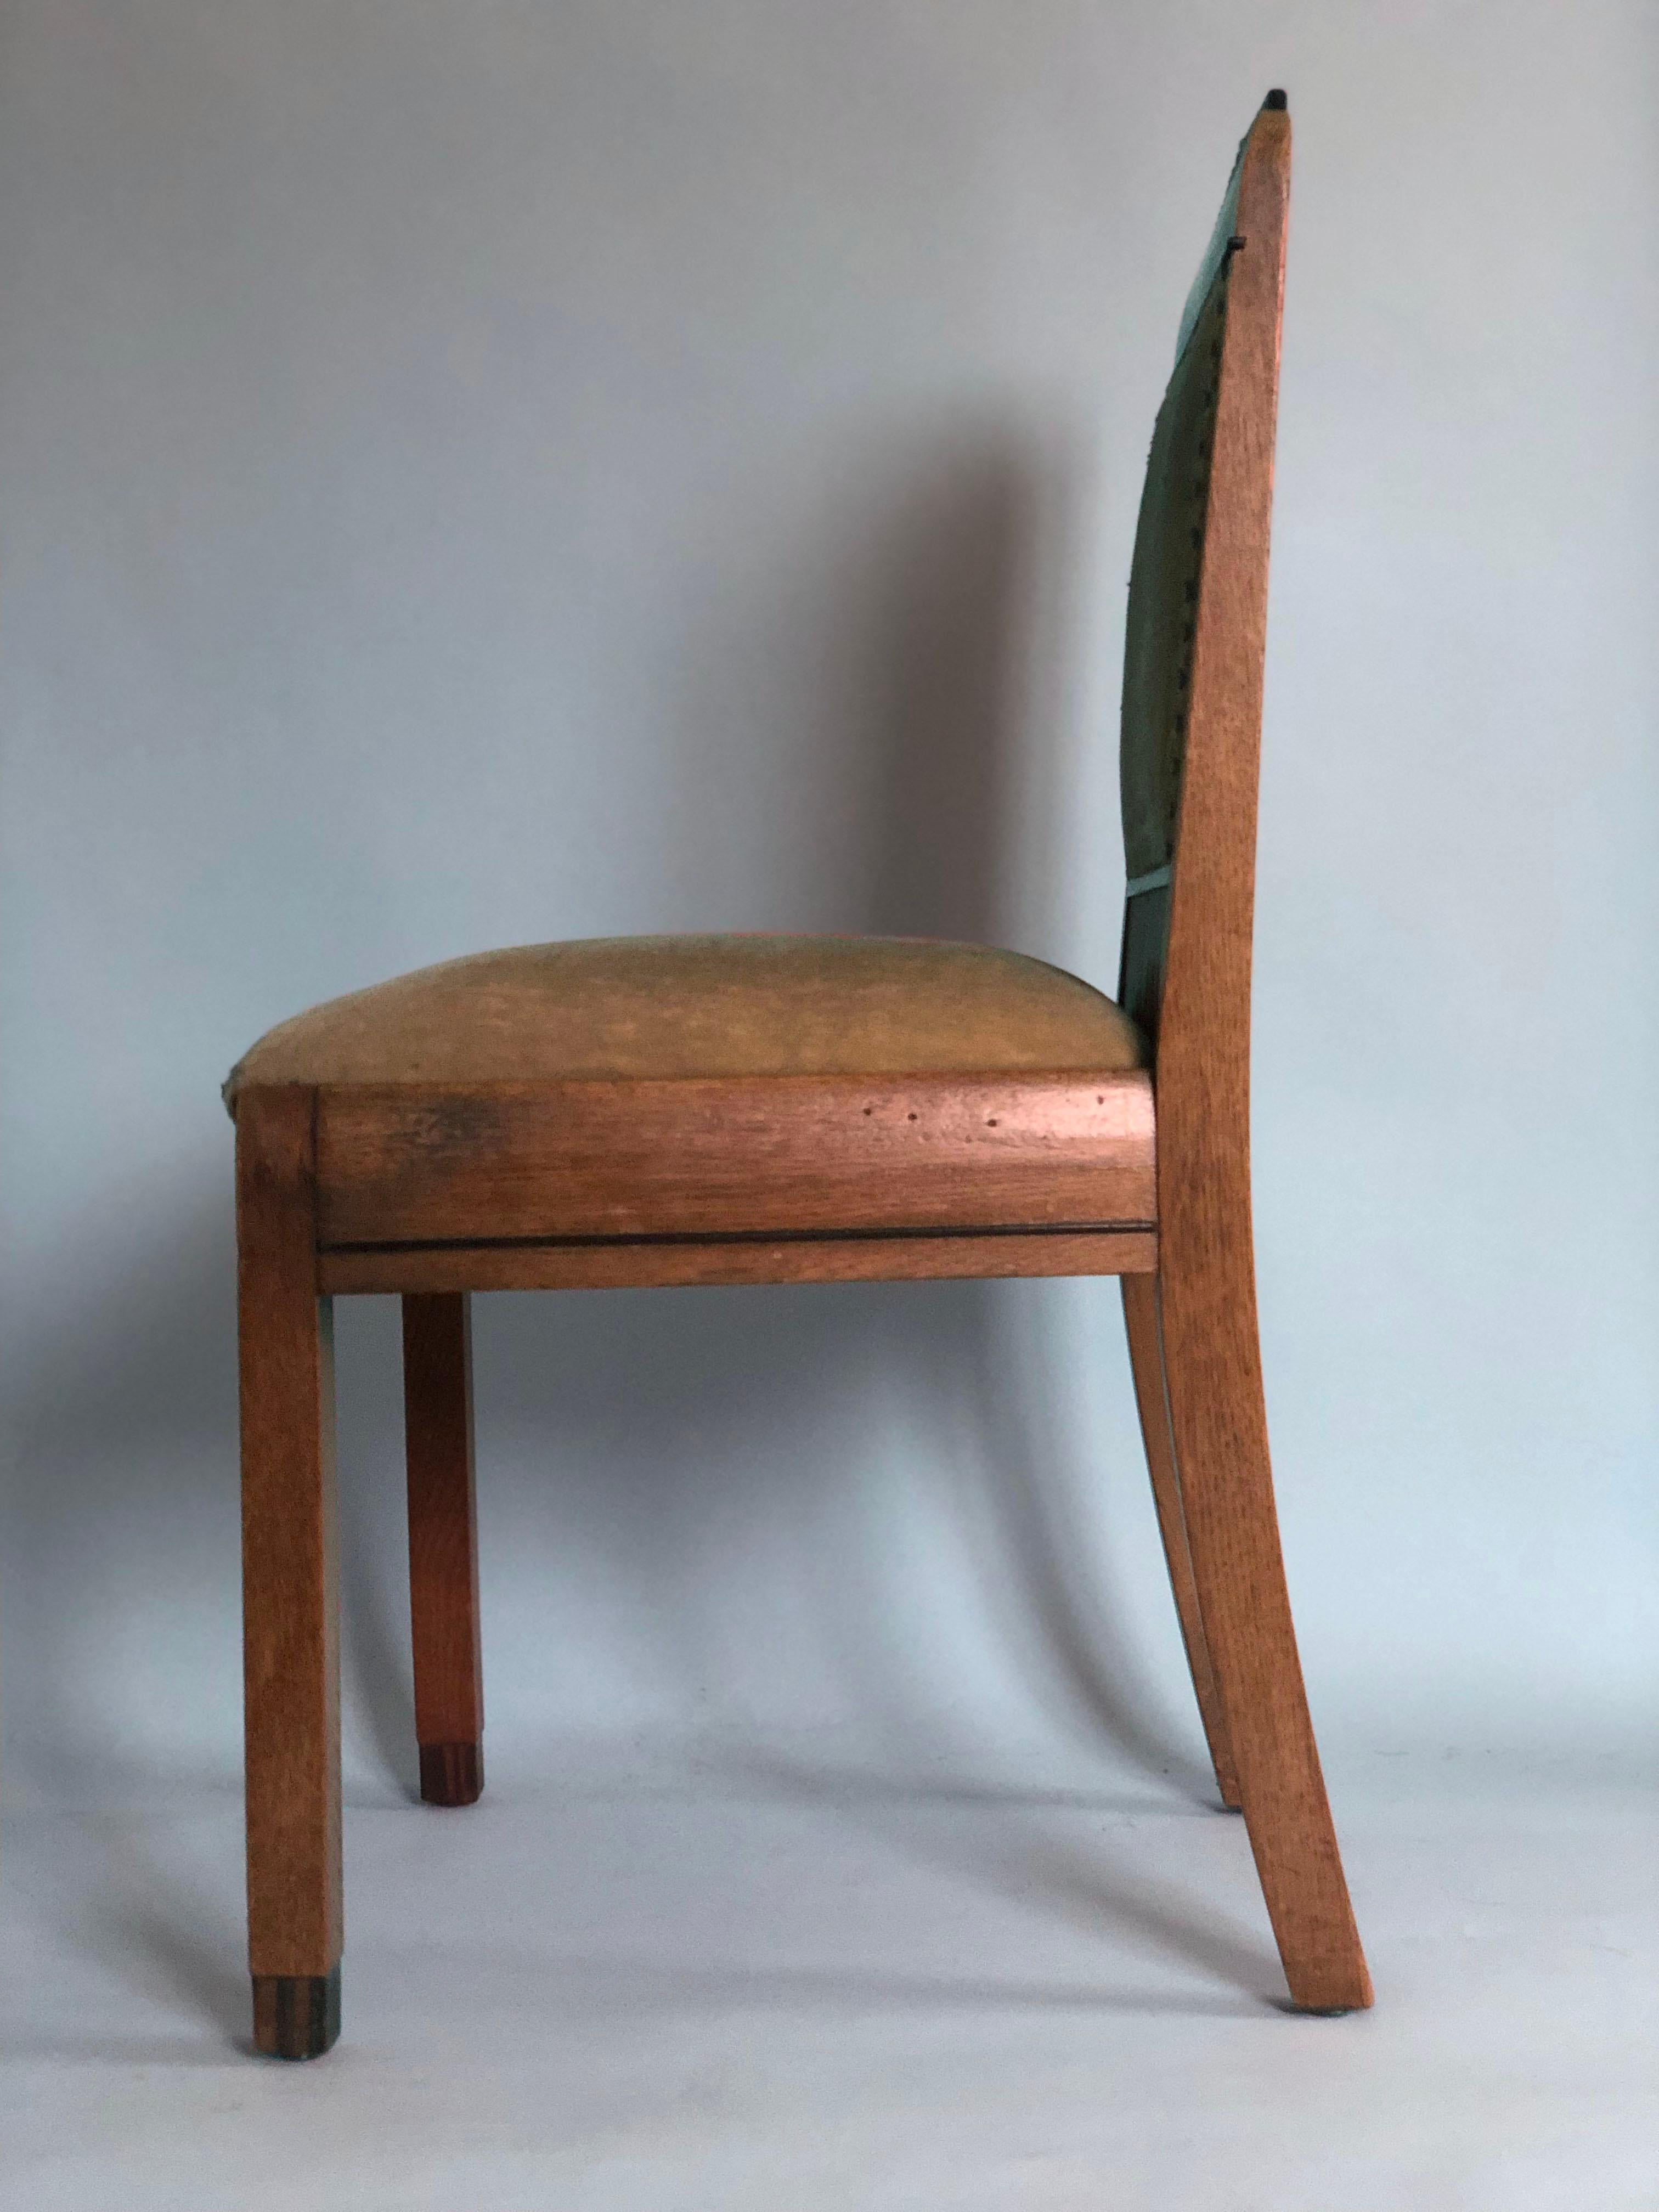 Early 20th Century Art Deco Detailed Amsterdam School Chair 1920s  For Sale